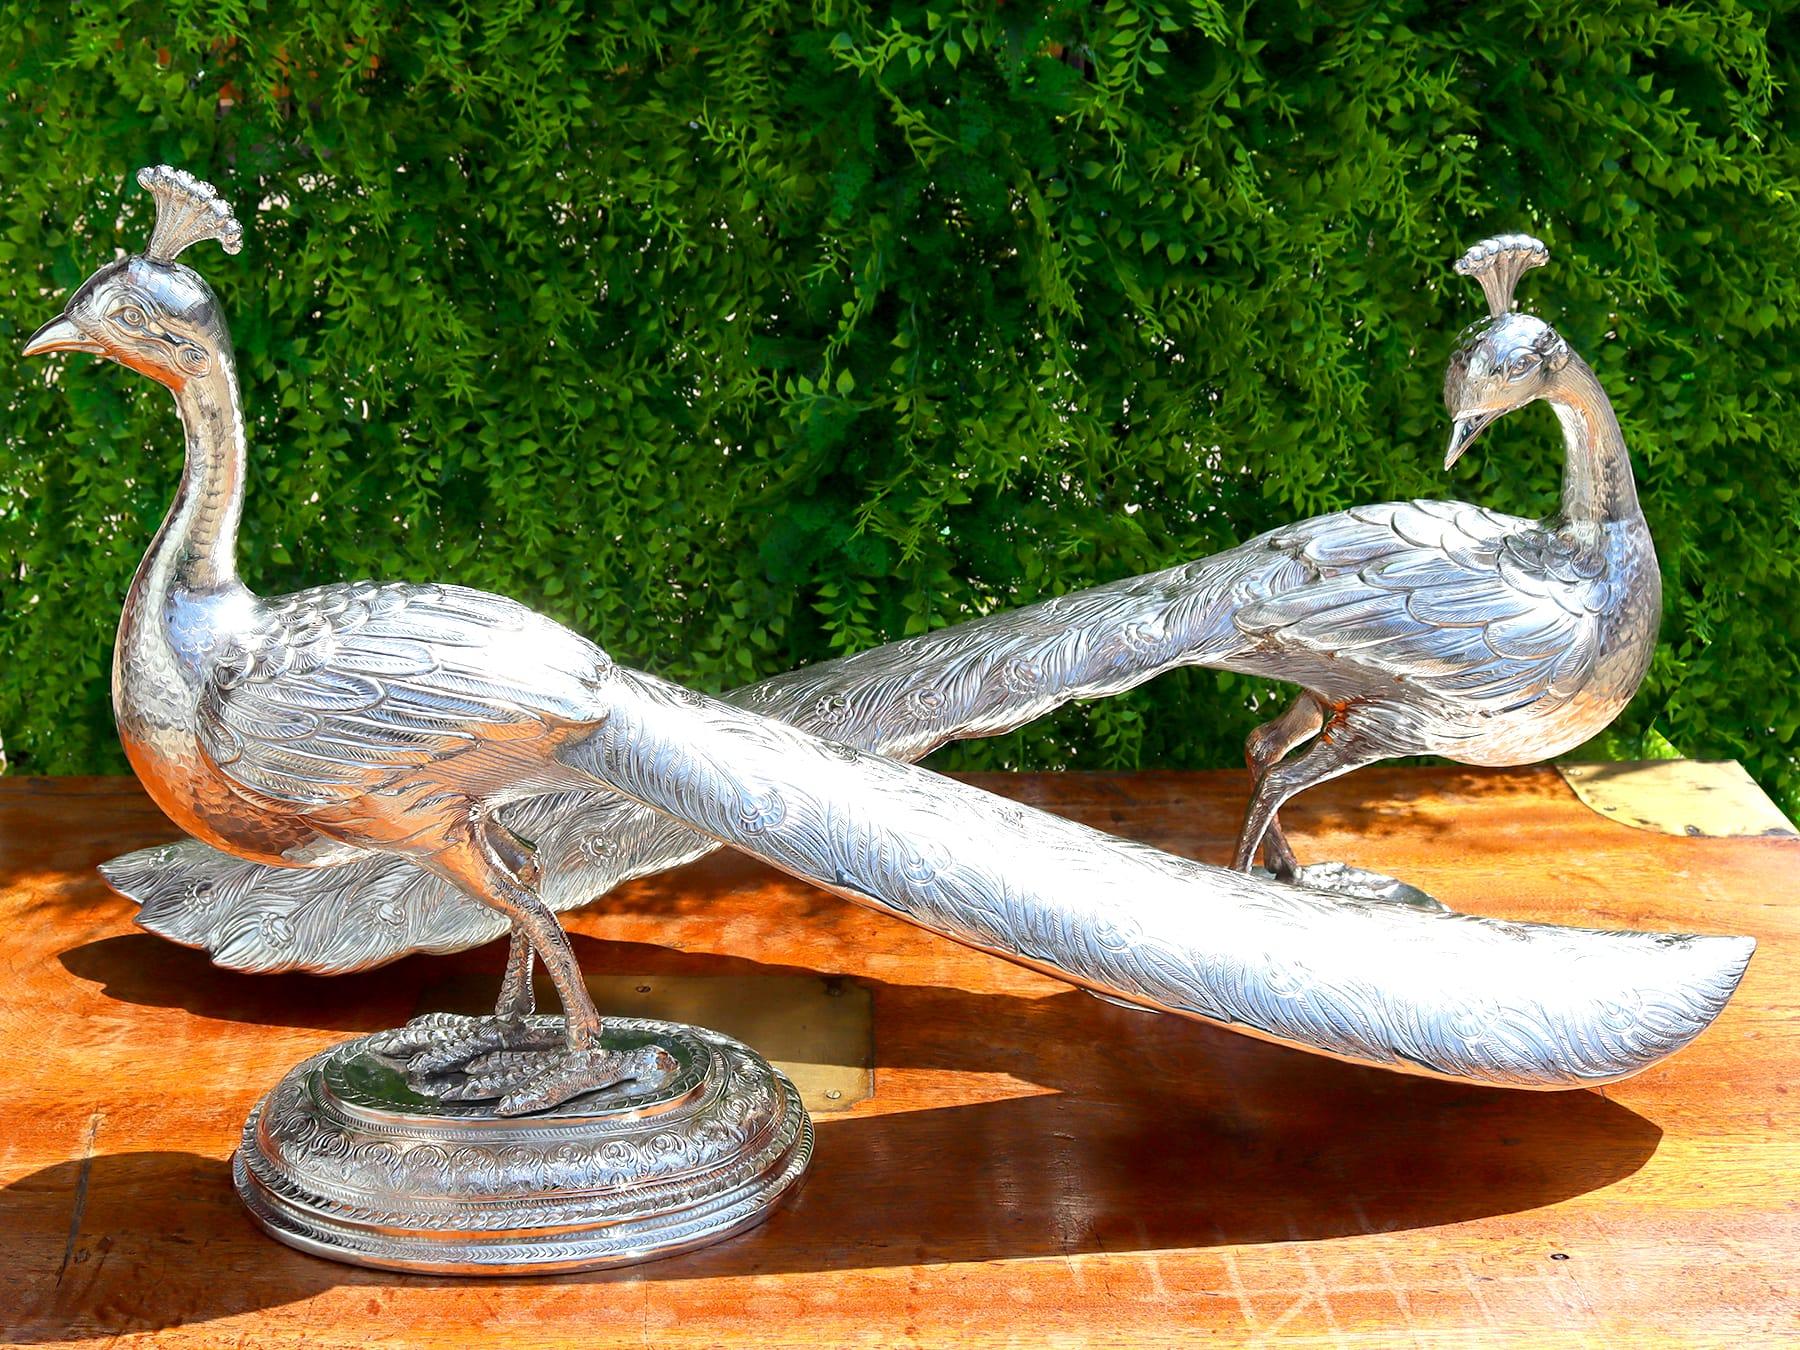 A magnificent, fine and impressive, pair of large silver bird ornaments; part of our ornamental silverware collection

These magnificent and large antique Indian silver table ornaments have been realistically modelled in the form of a pair of